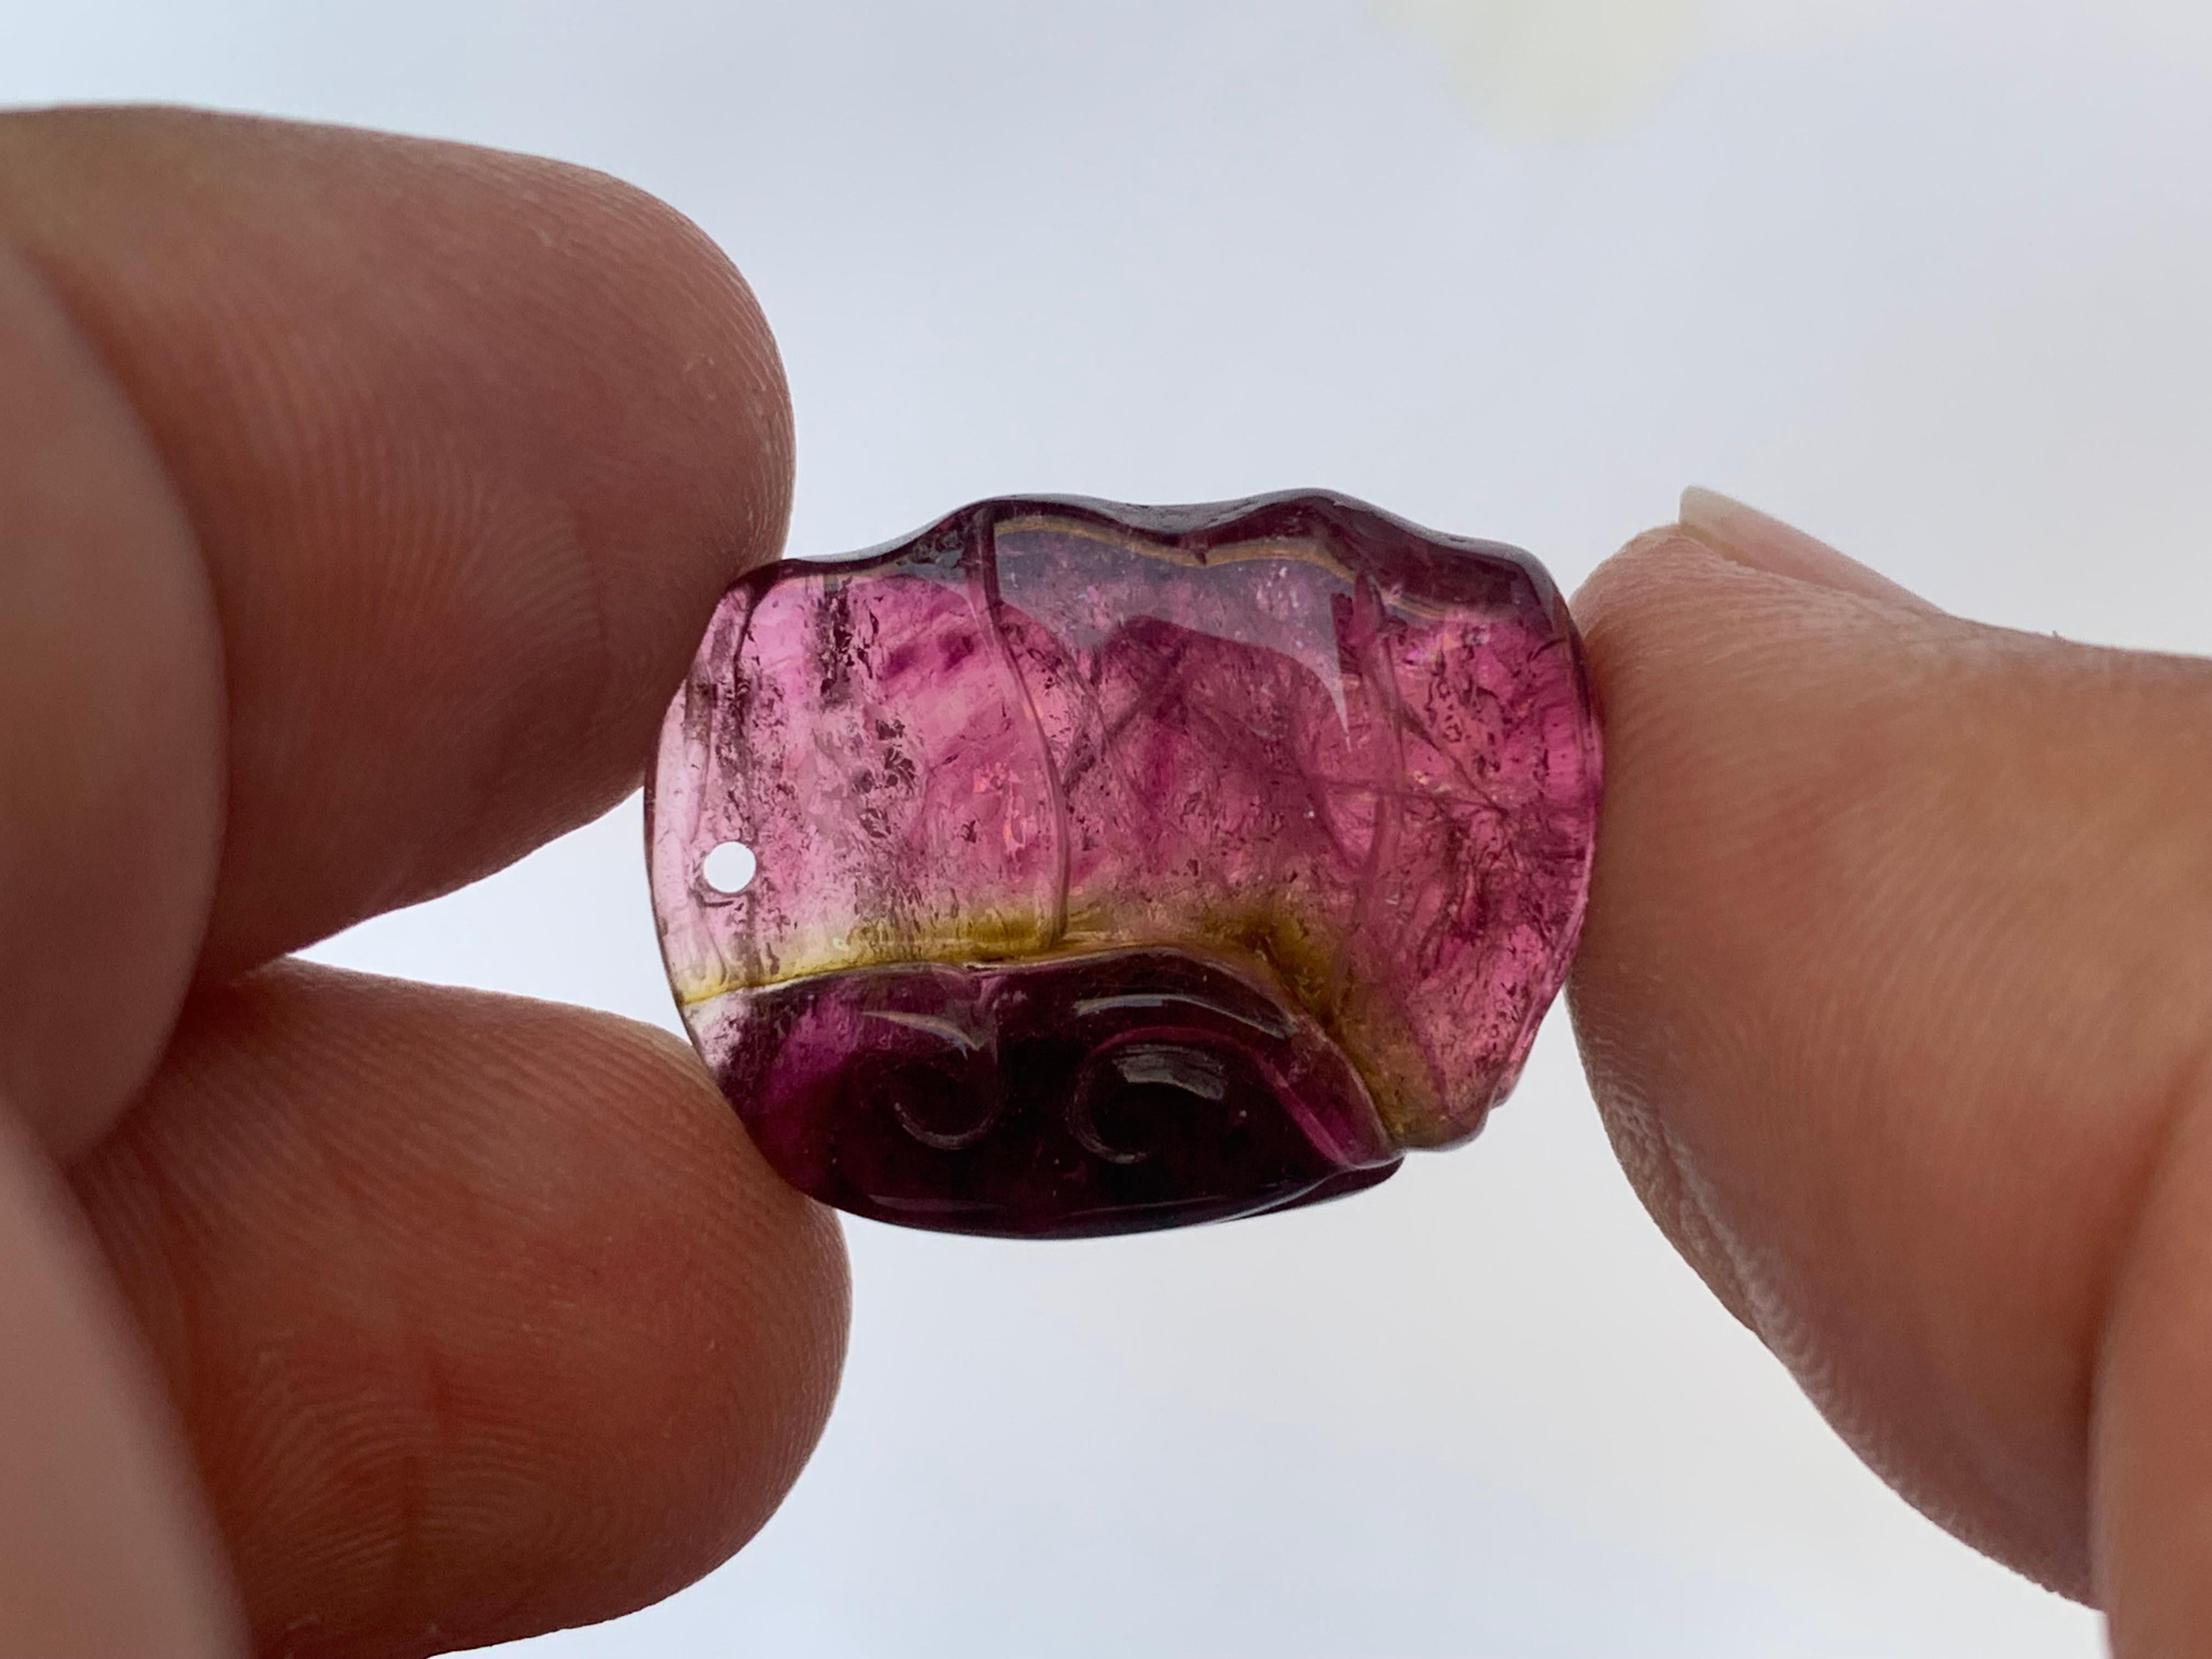 18th Century and Earlier 23.85 Carat Stunning Loose Tri Color Tourmaline Drilled Carving from Afghanistan